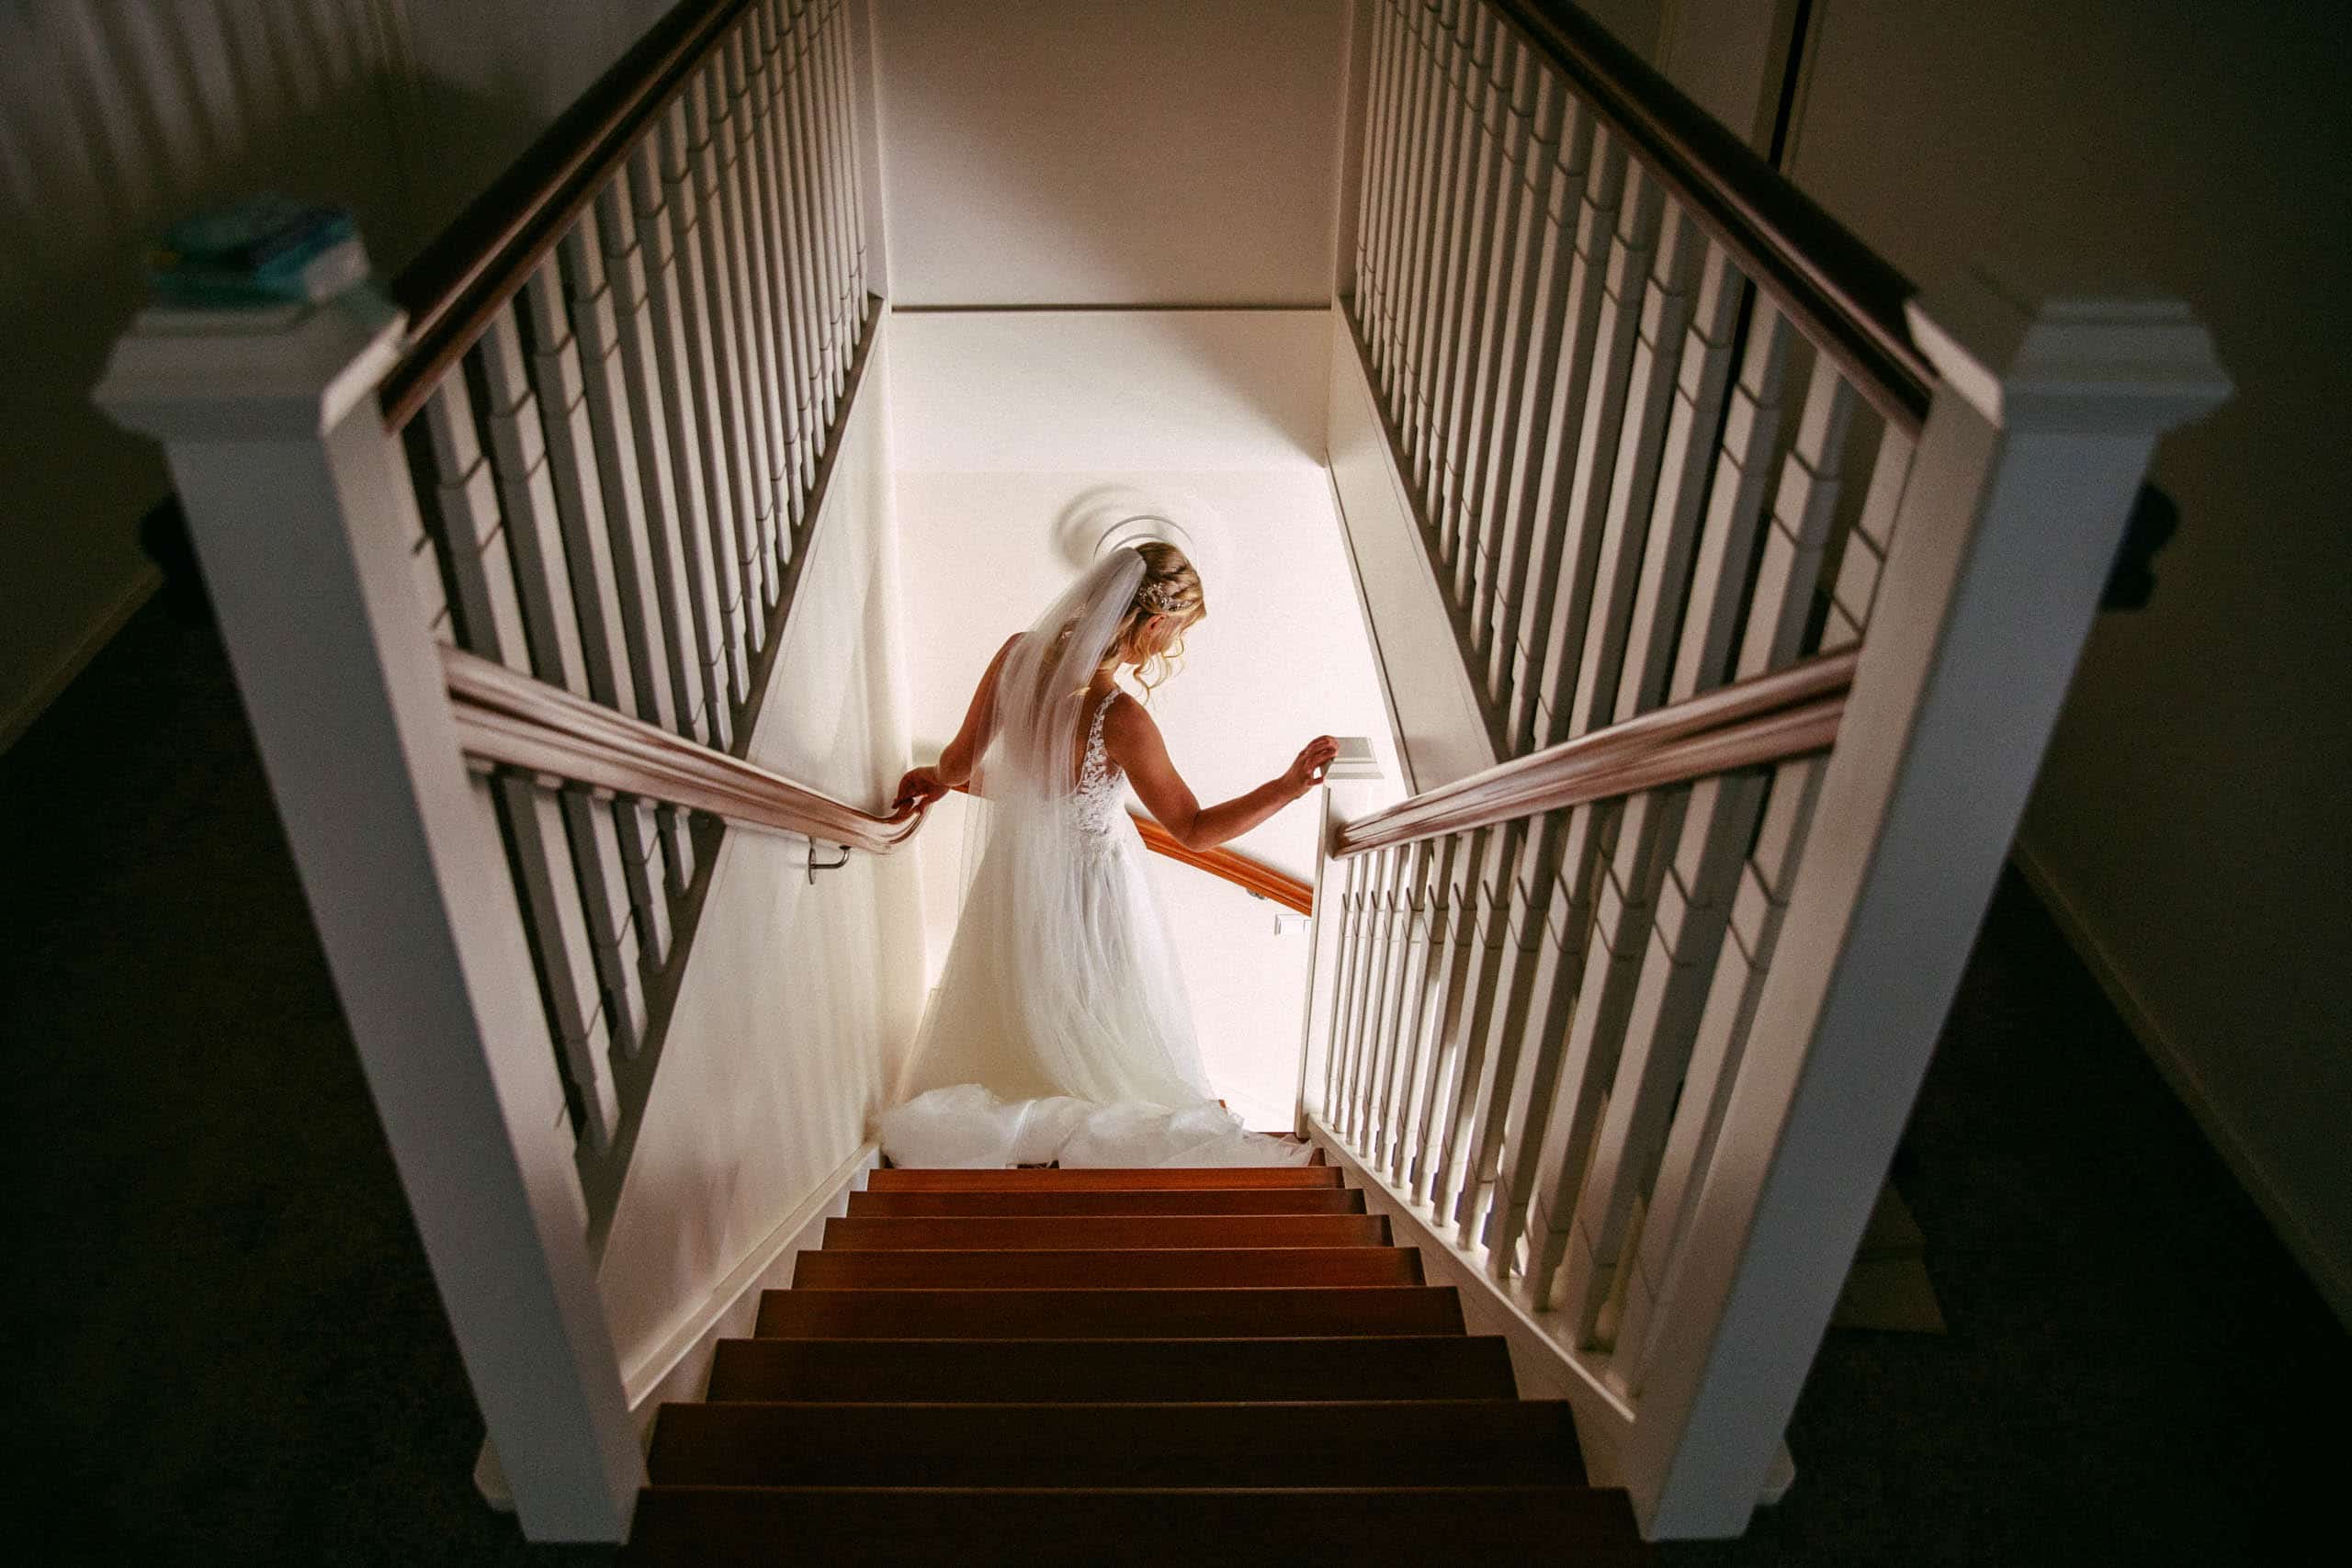 A bride gracefully walks down the stairs in her wedding dress, creating extraordinary wedding photos.